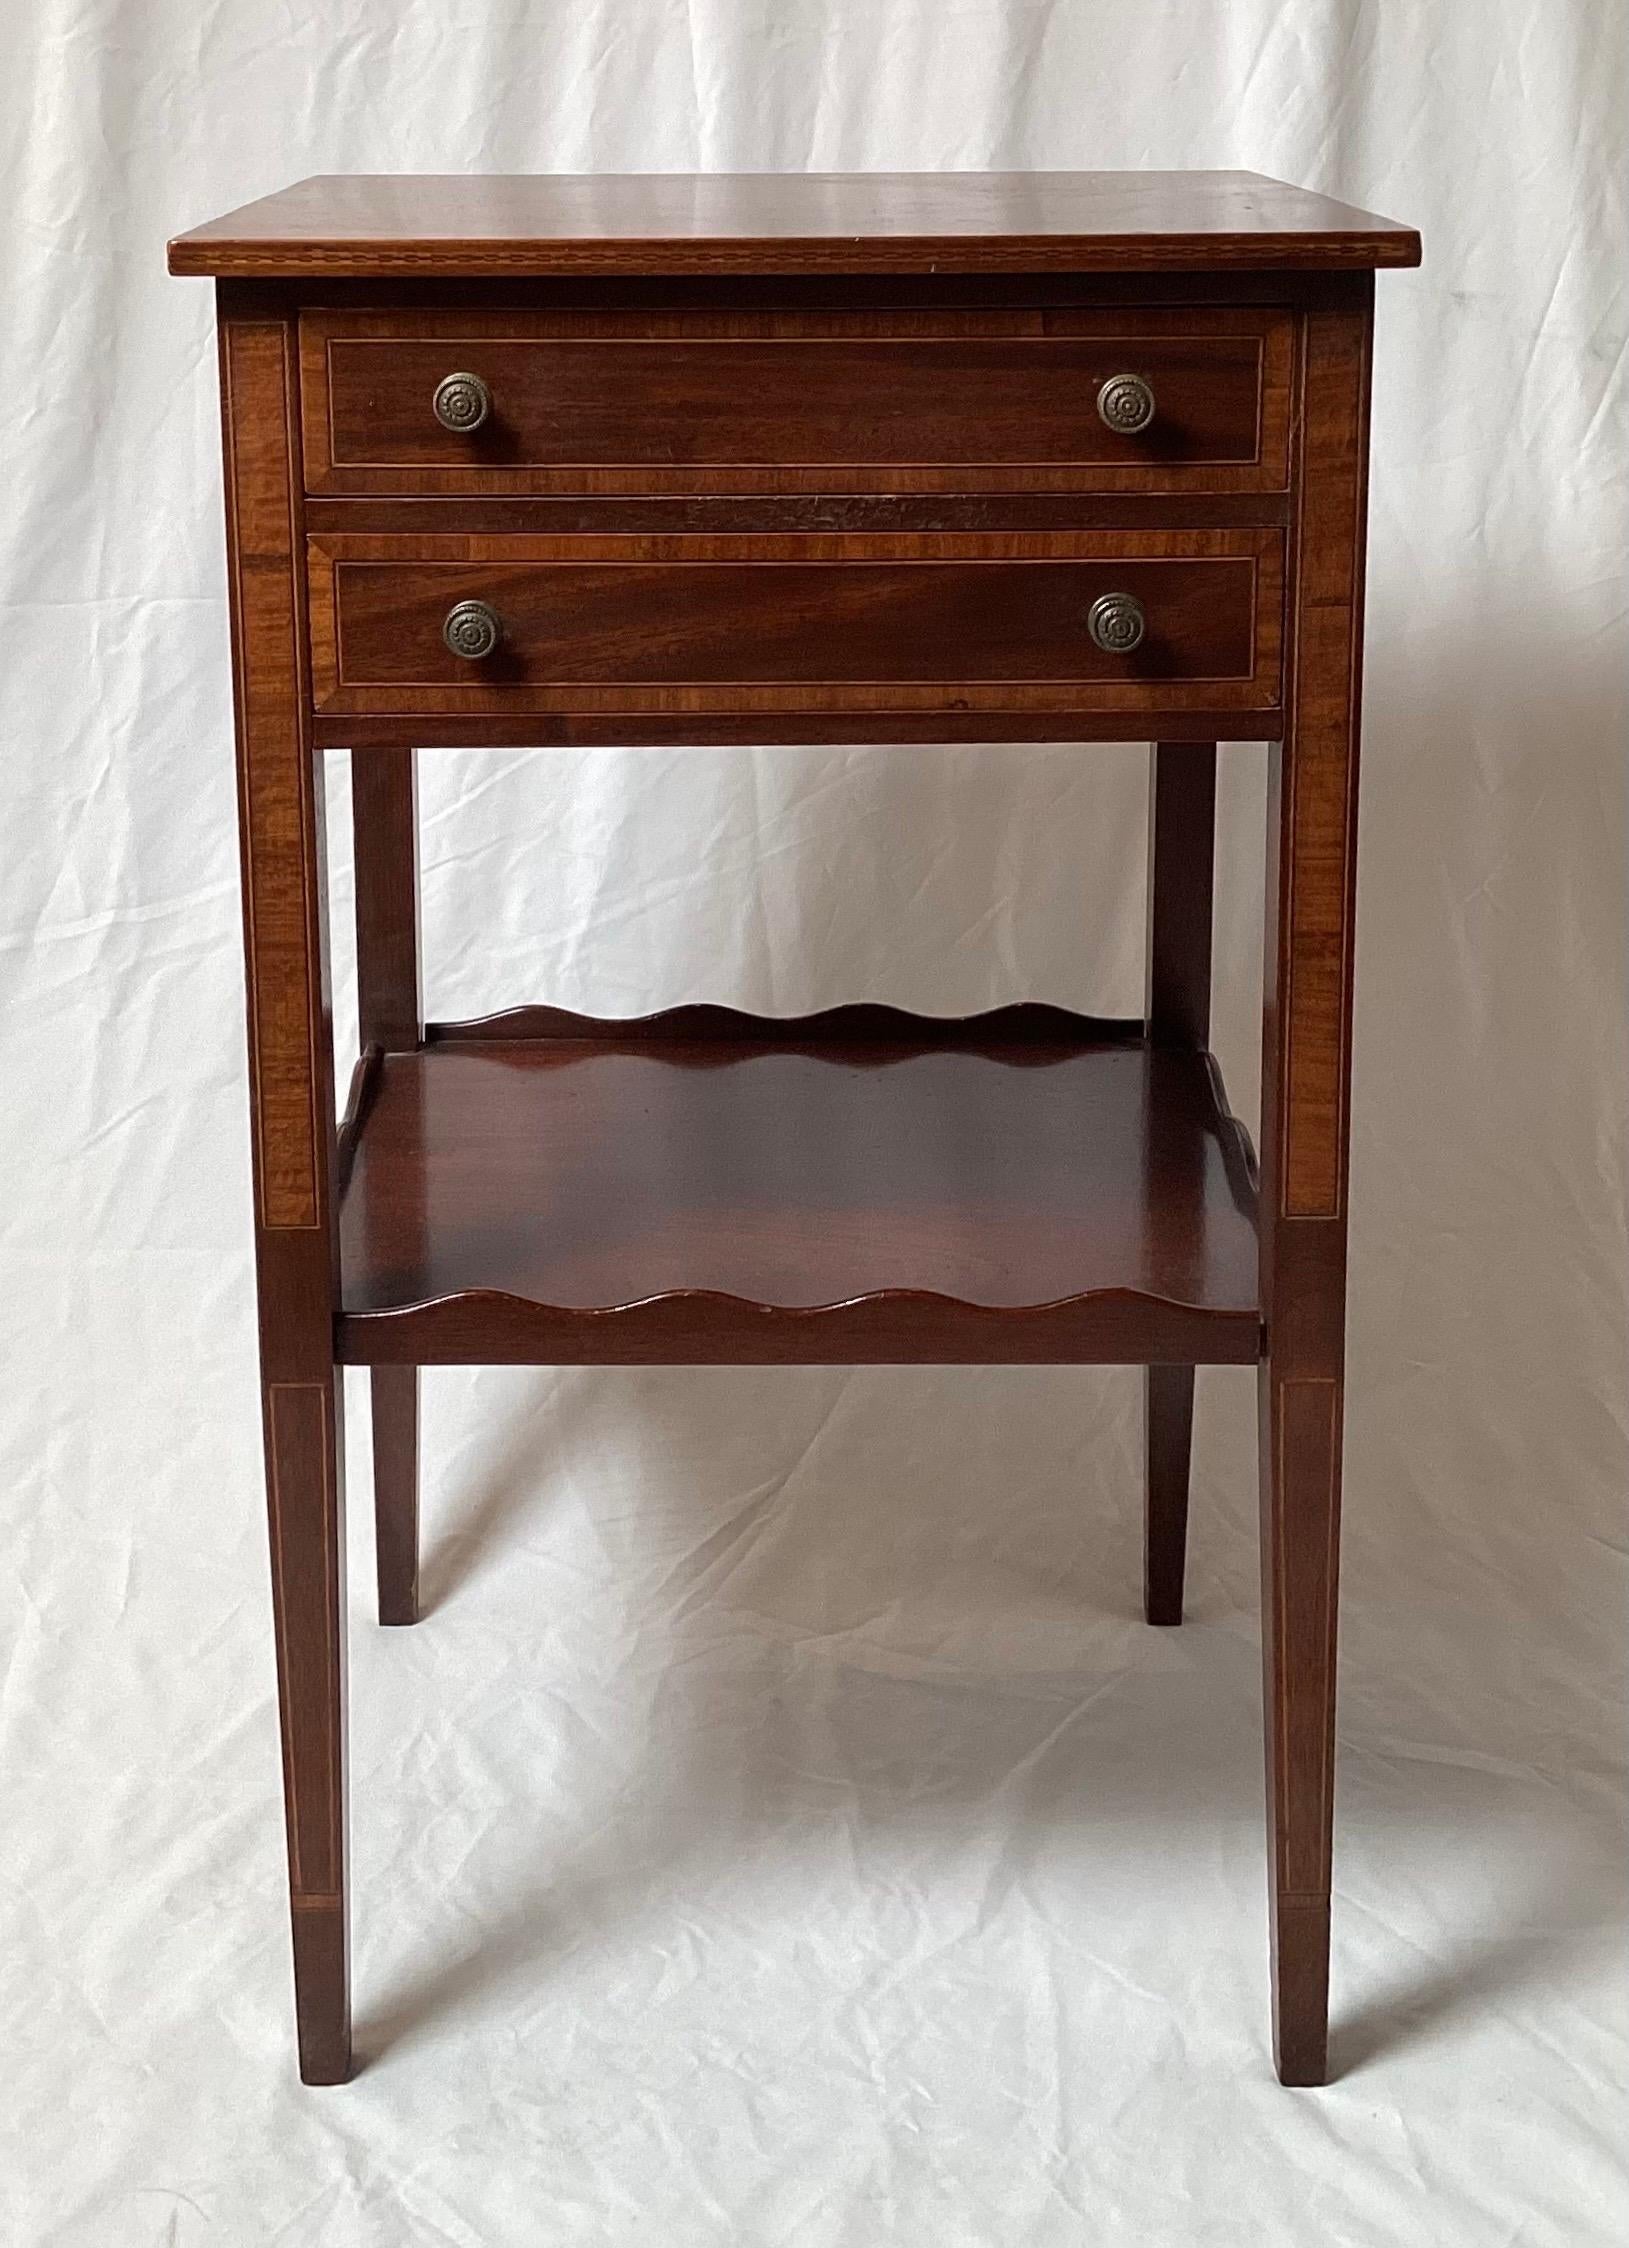 A pair of Federal style Mahogany side tables with cross banding trim.  The top with two slender drawers with antiques brass pulls on tapering legs with a lower shelf with scalloped gallery edge.  A nice diminutive size, 29 inches tall, 17.5 inches